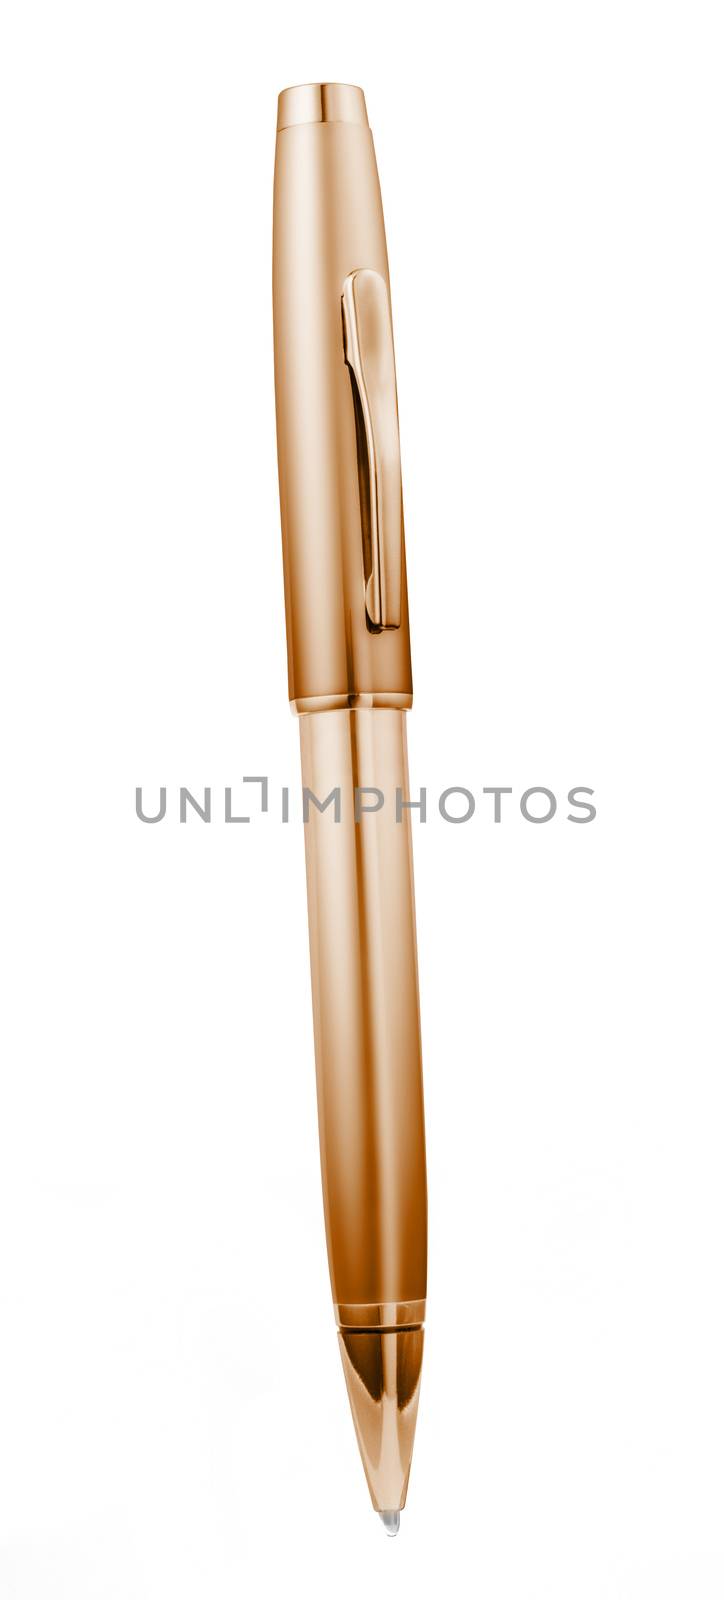 Copper metal pen isolated on white background